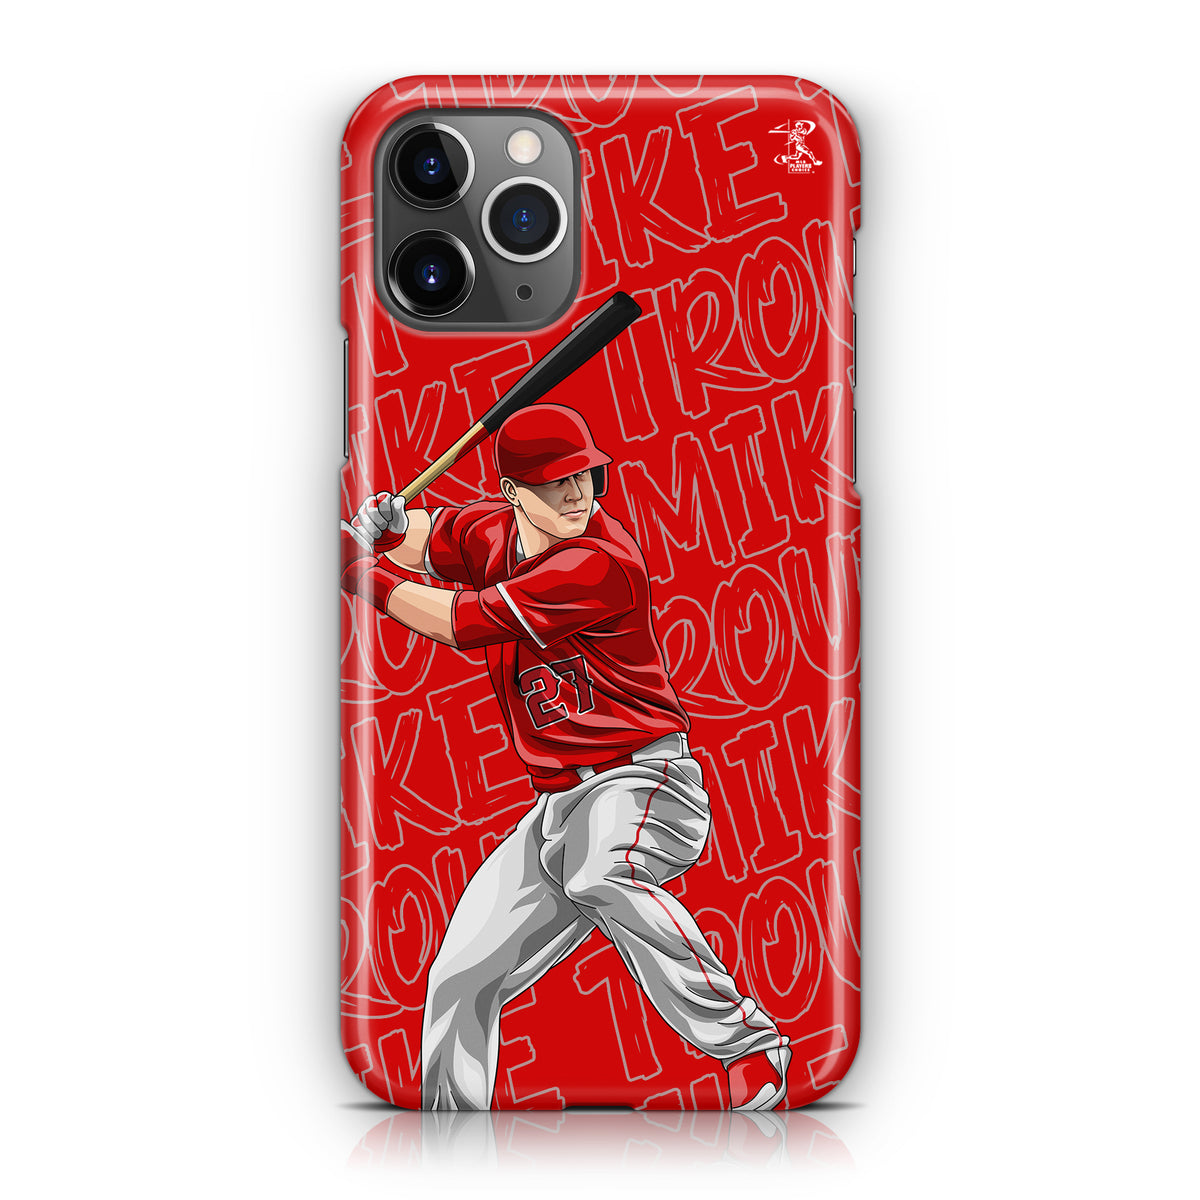 Mike Trout iPhone Case for Sale by dekuuu